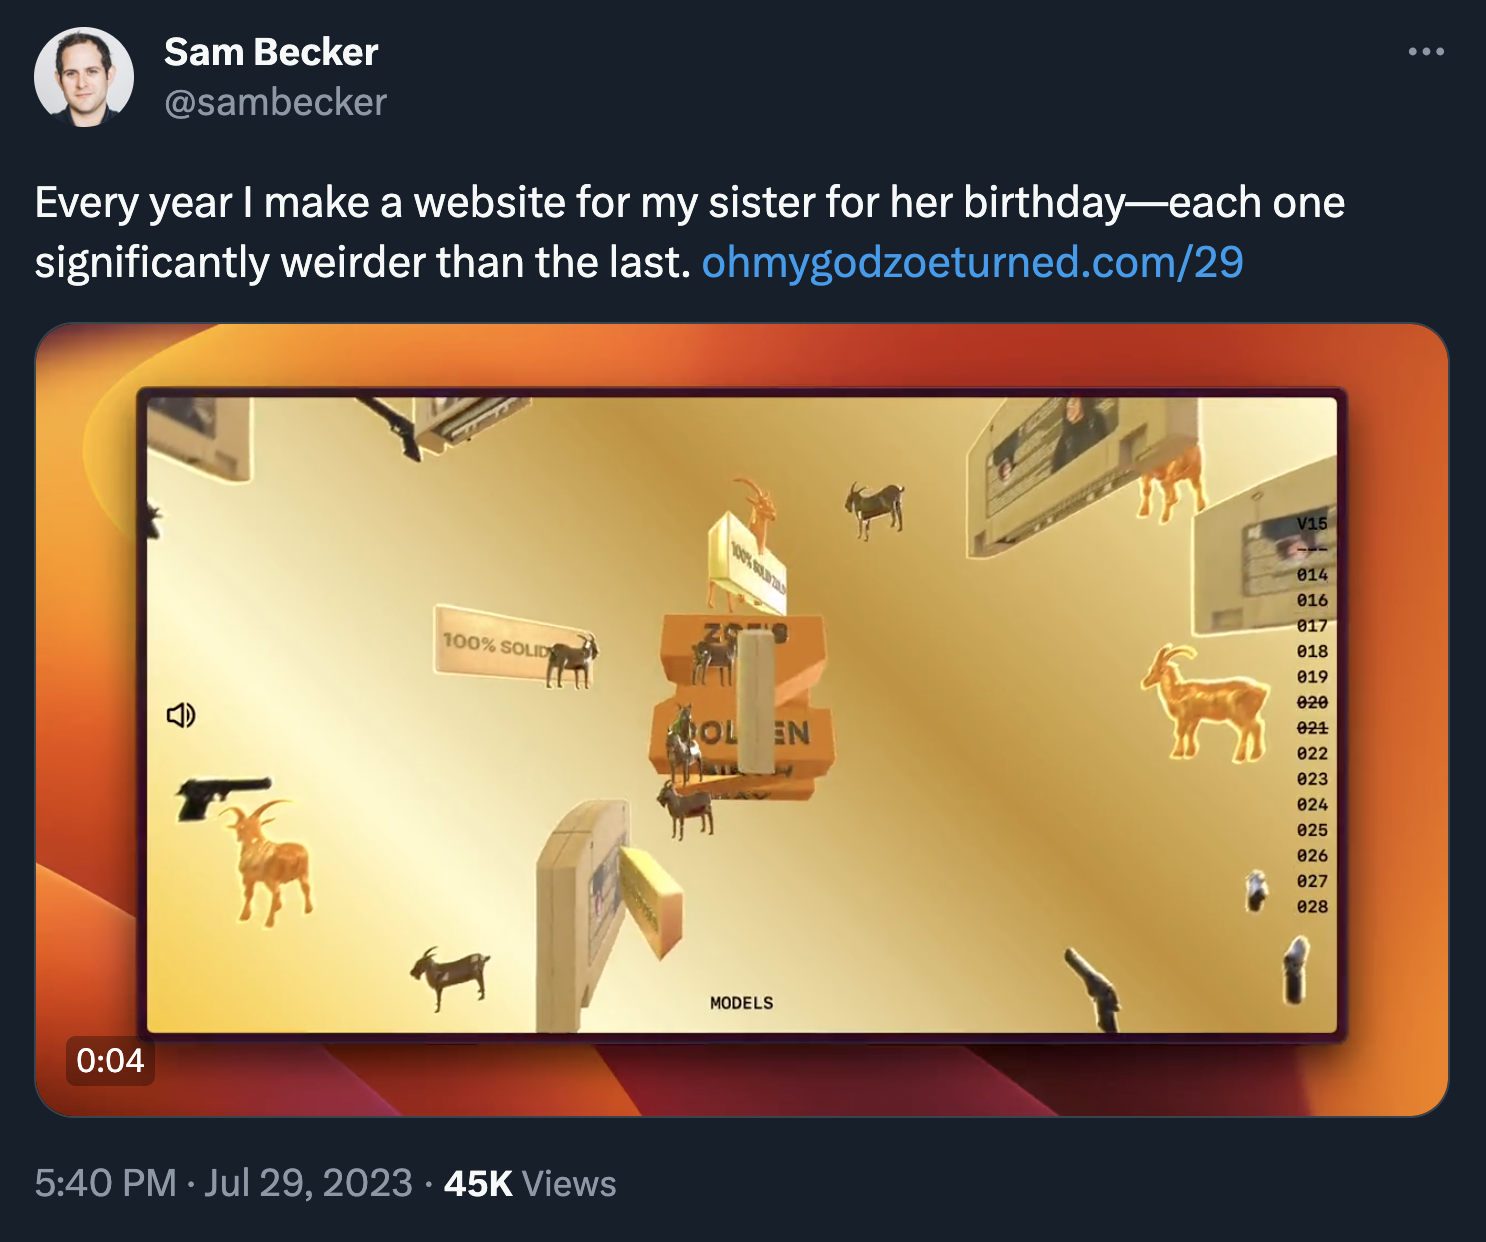 Tweet from Sam Becker: Every year I make a website for my sister for her birthday—each one significantly weirder than the last. https://ohmygodzoeturned.com/29